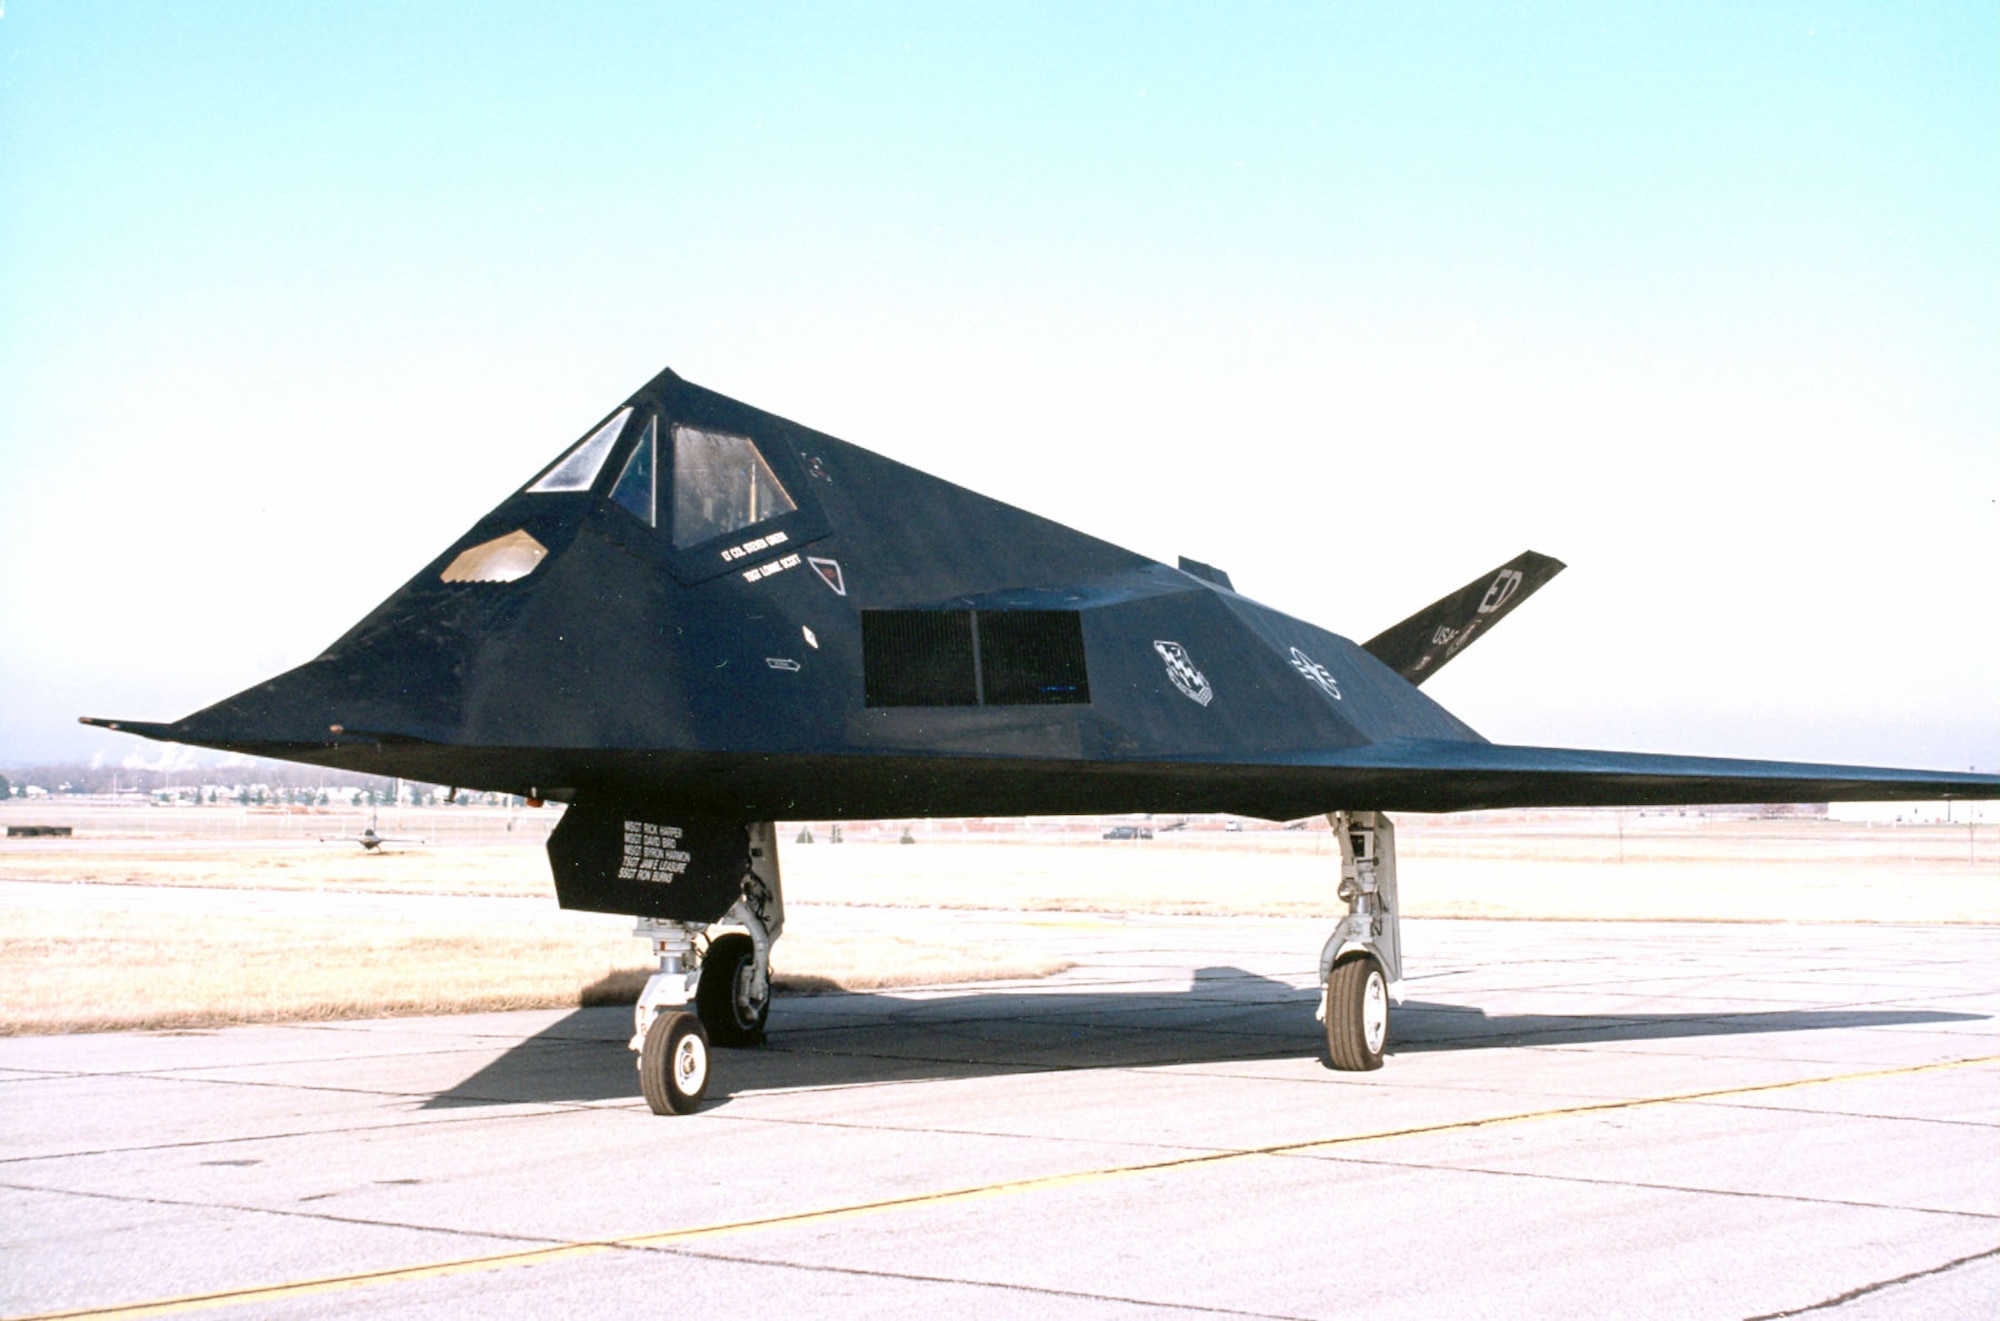 DAYTON, Ohio -- Lockheed F-117A Nighthawk at the National Museum of the United States Air Force. (U.S. Air Force photo)